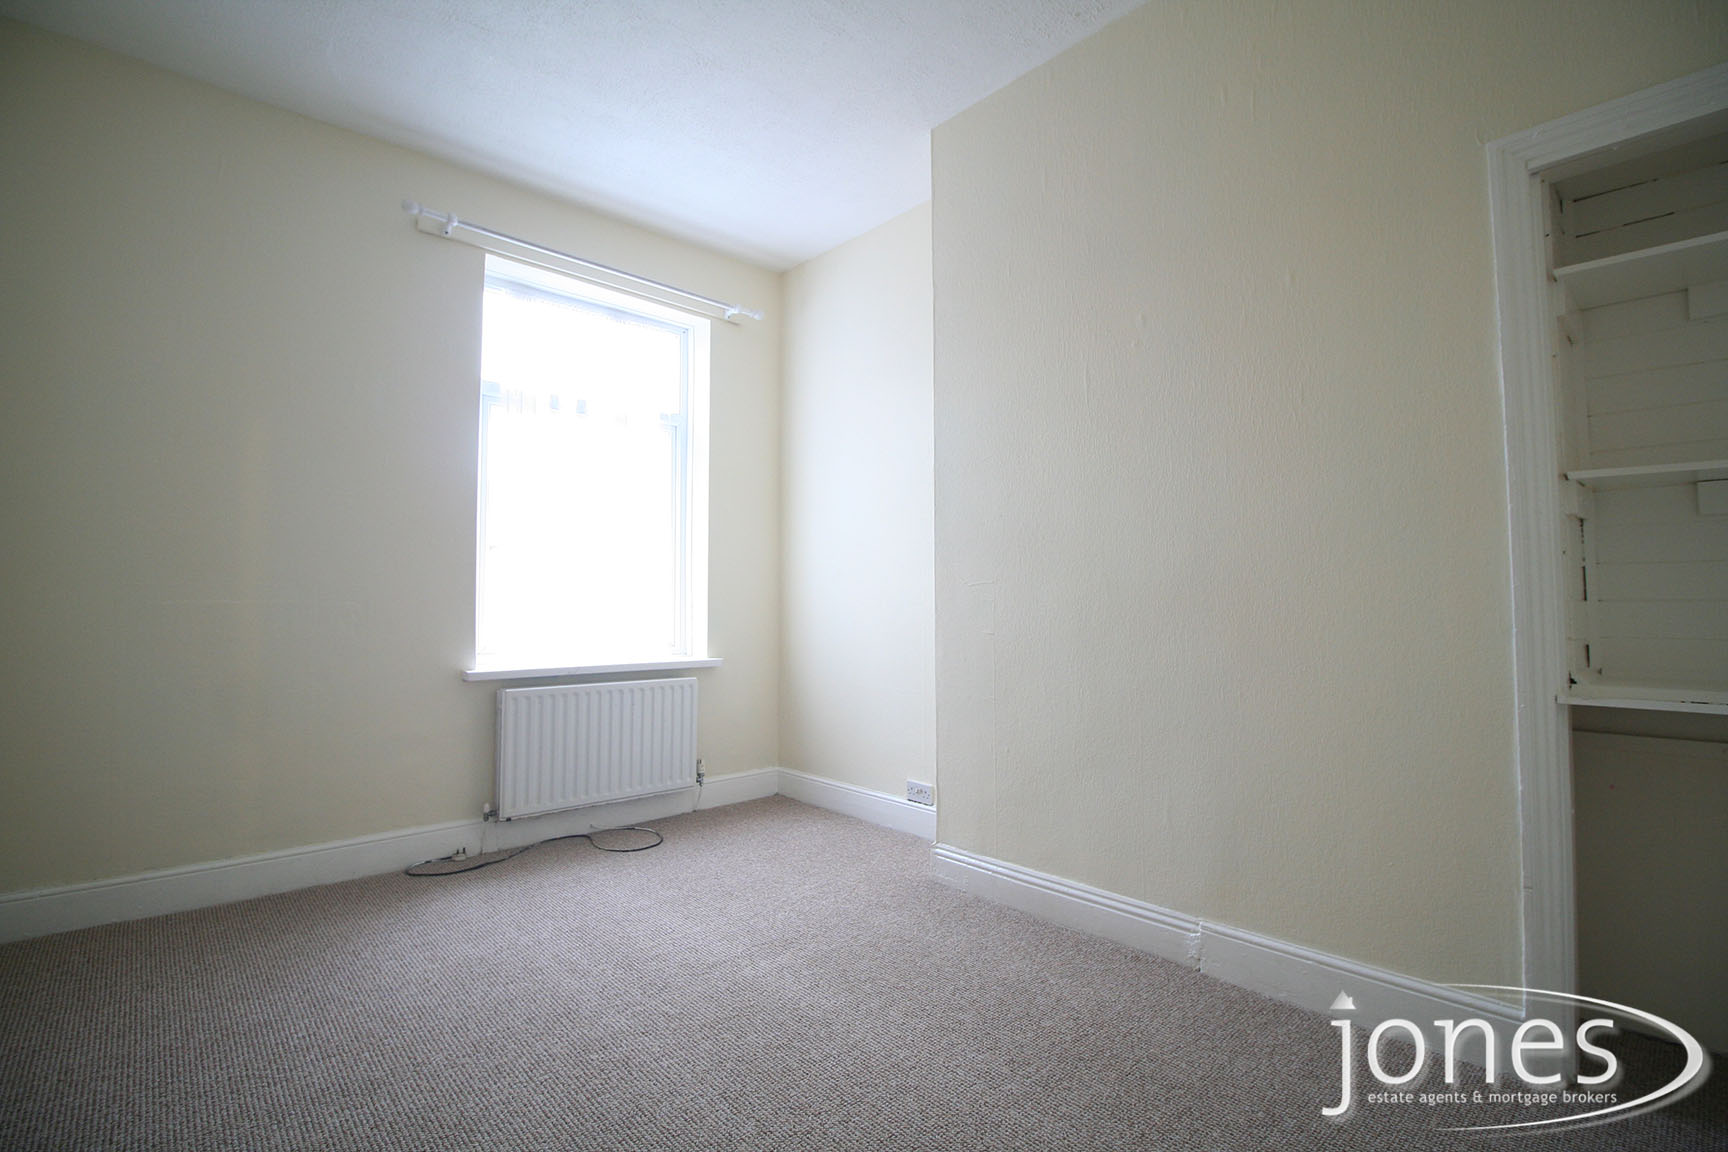 Home for Sale Let - Photo 06 Victoria Road,  Thornaby, Stockton on Tees TS17 6HH